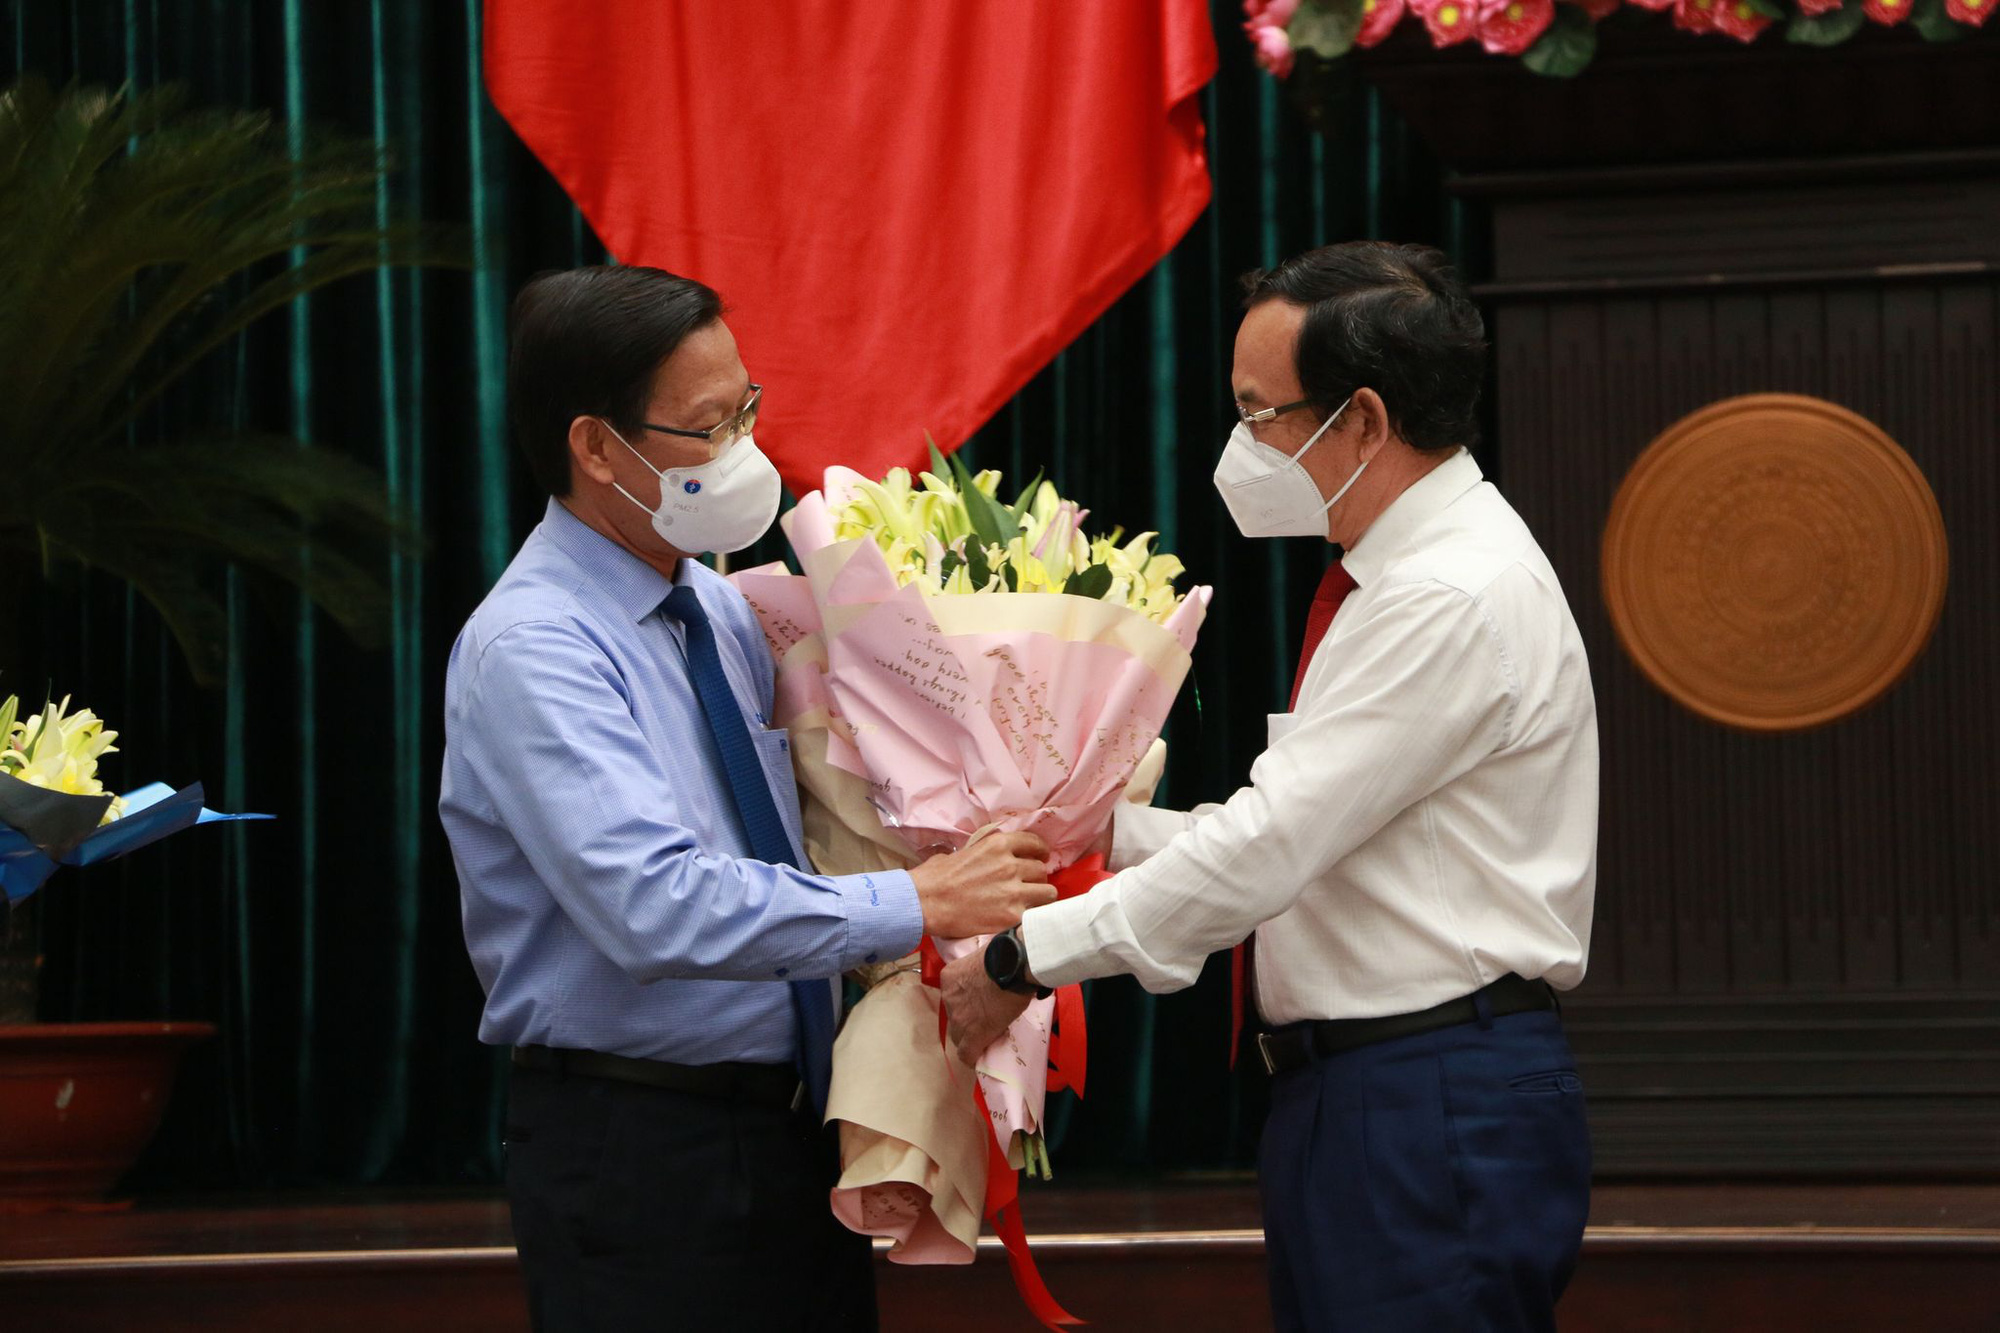 Chairman of the Ho Chi Minh City People’s Committee Phan Van Mai (L) receives flowers from Secretary of the city’s Party Committee Nguyen Van Nen, August 24, 2021. Photo: T.H. / Tuoi Tre